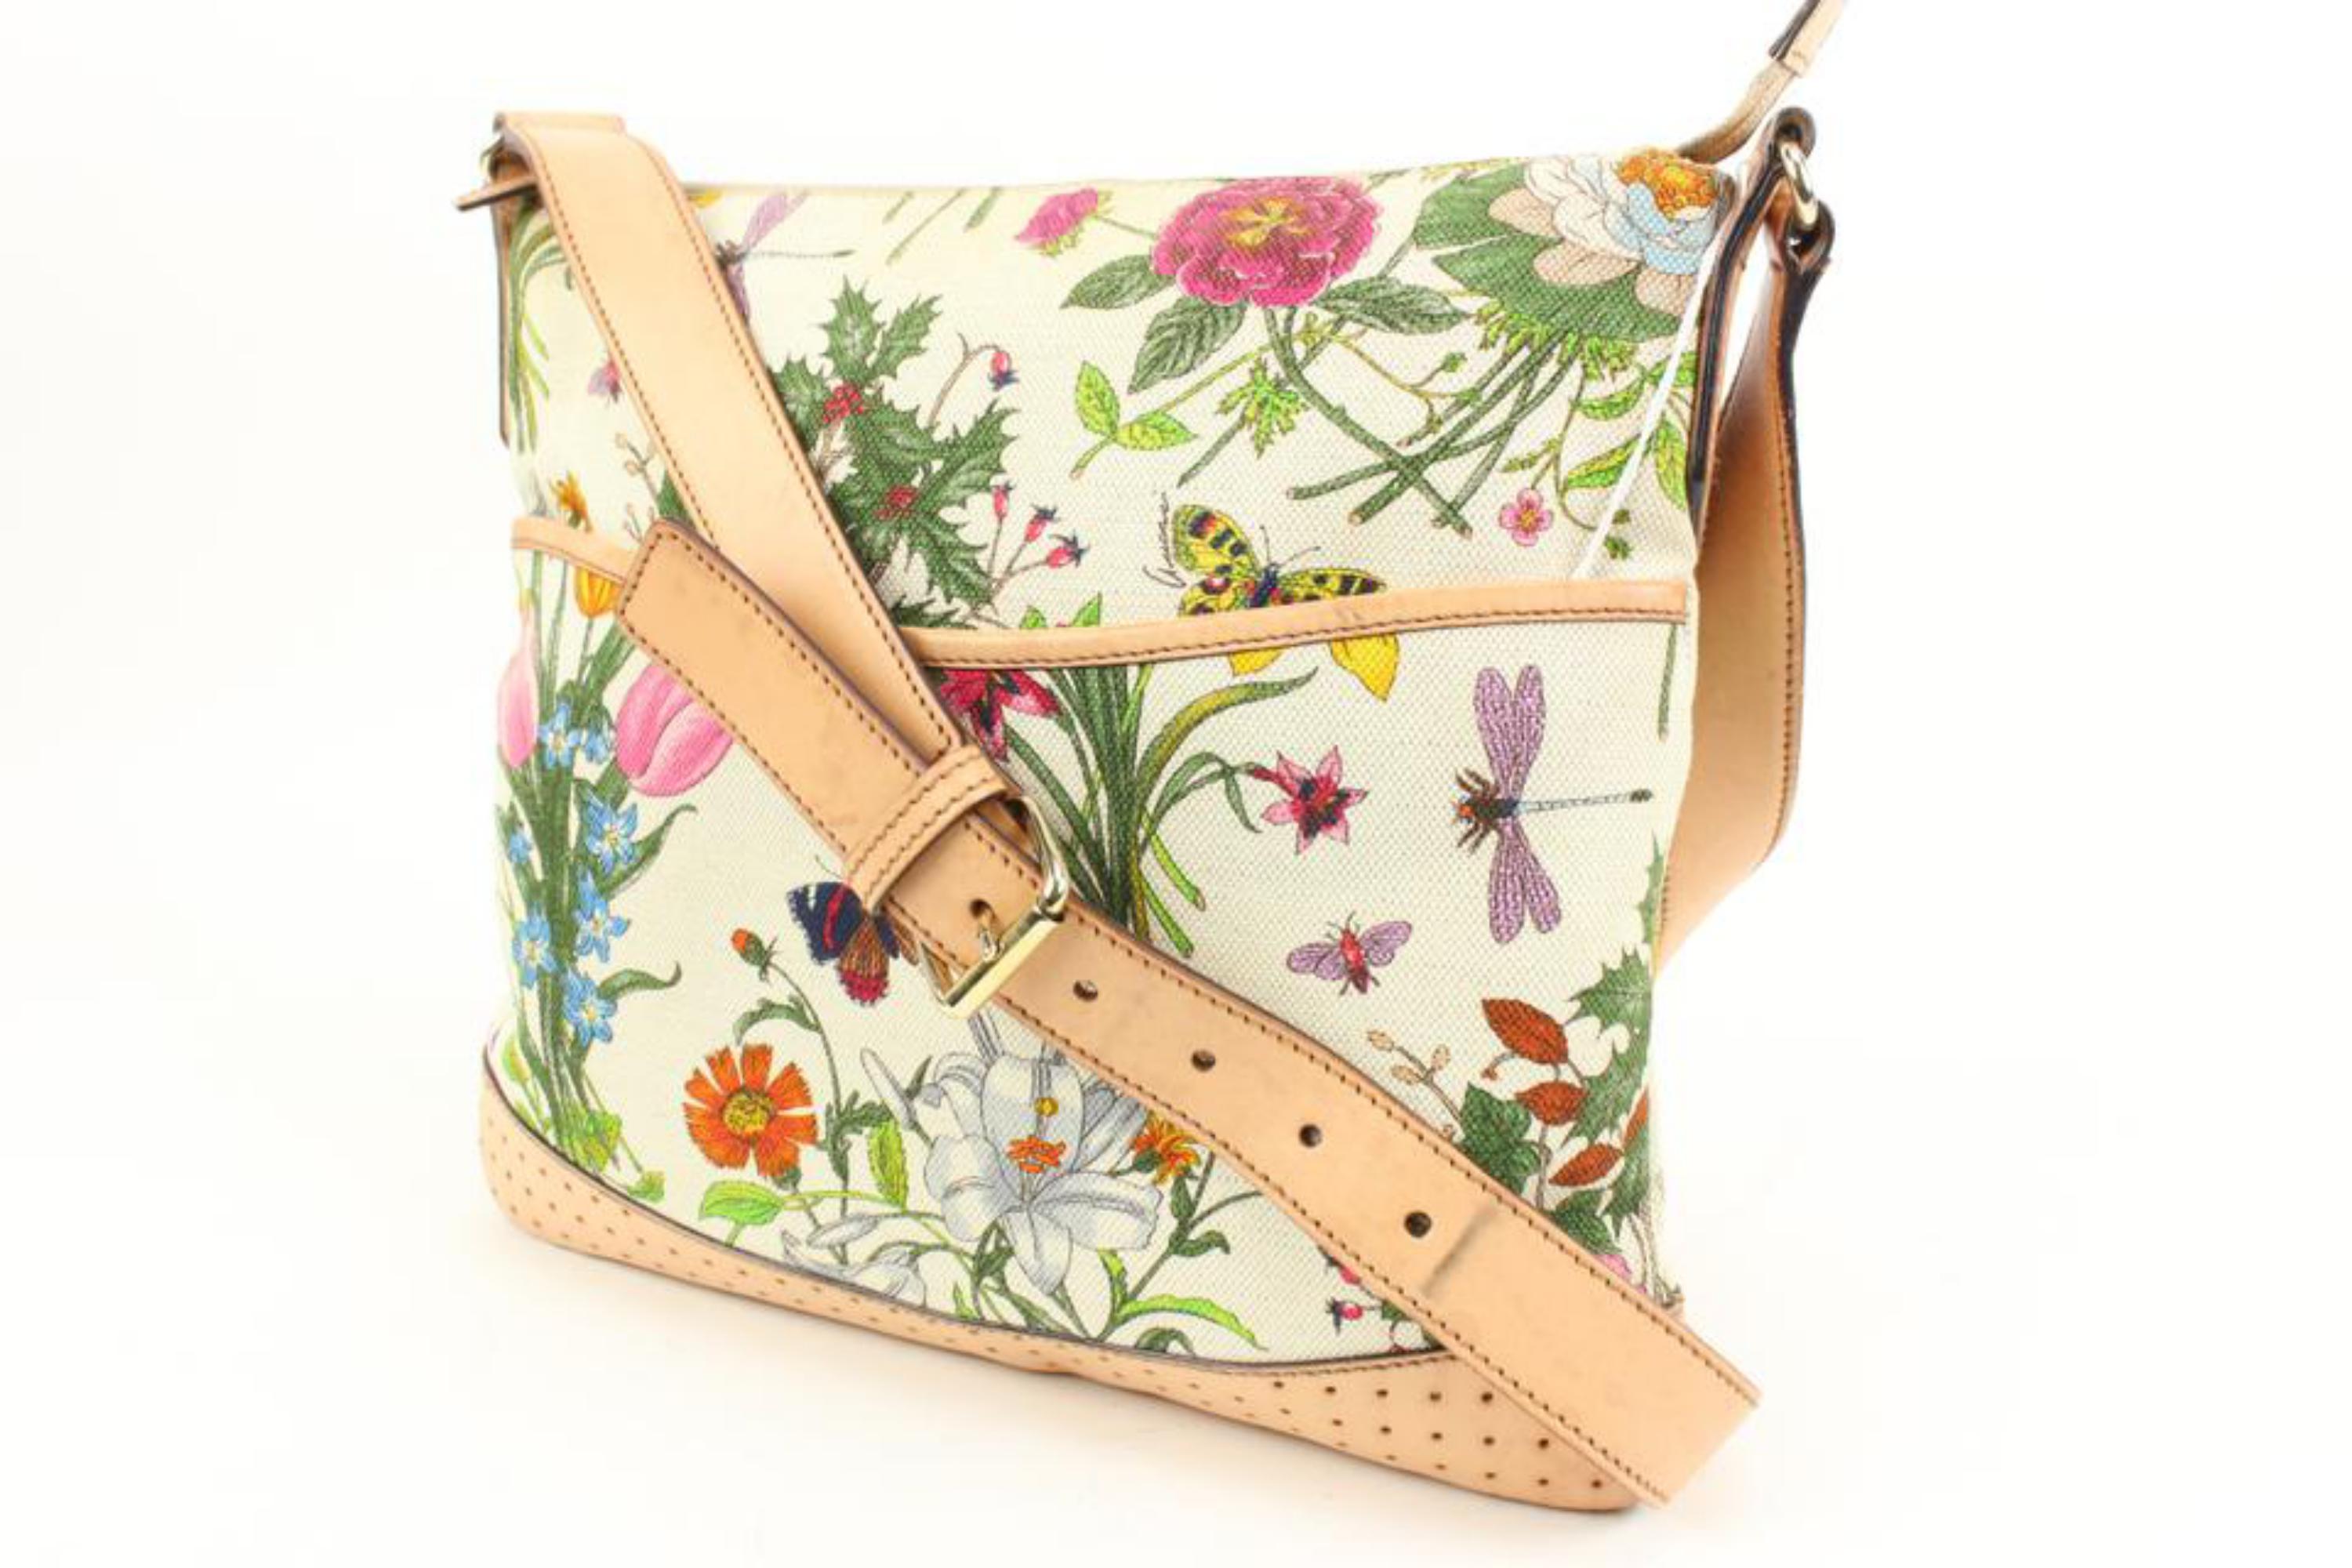 Gucci Butterfly Floral Perforated Leather Messenger Crossbody 85g317s
Date Code/Serial Number: 145857 2123
Made In: Italy
Measurements: Length:  12